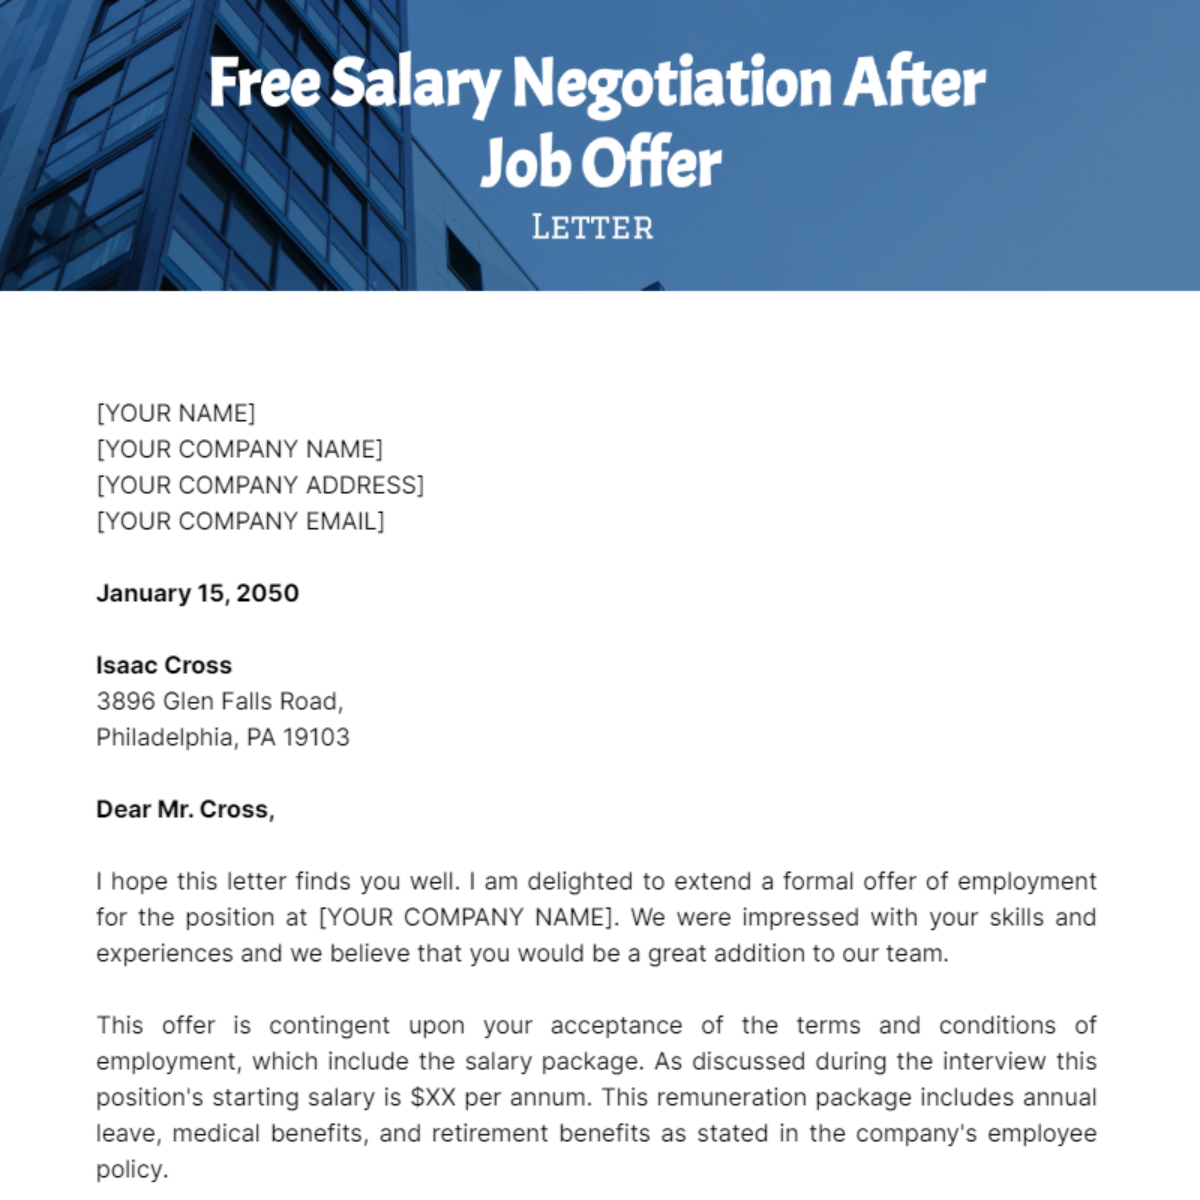 Salary Negotiation Letter after Job Offer Template